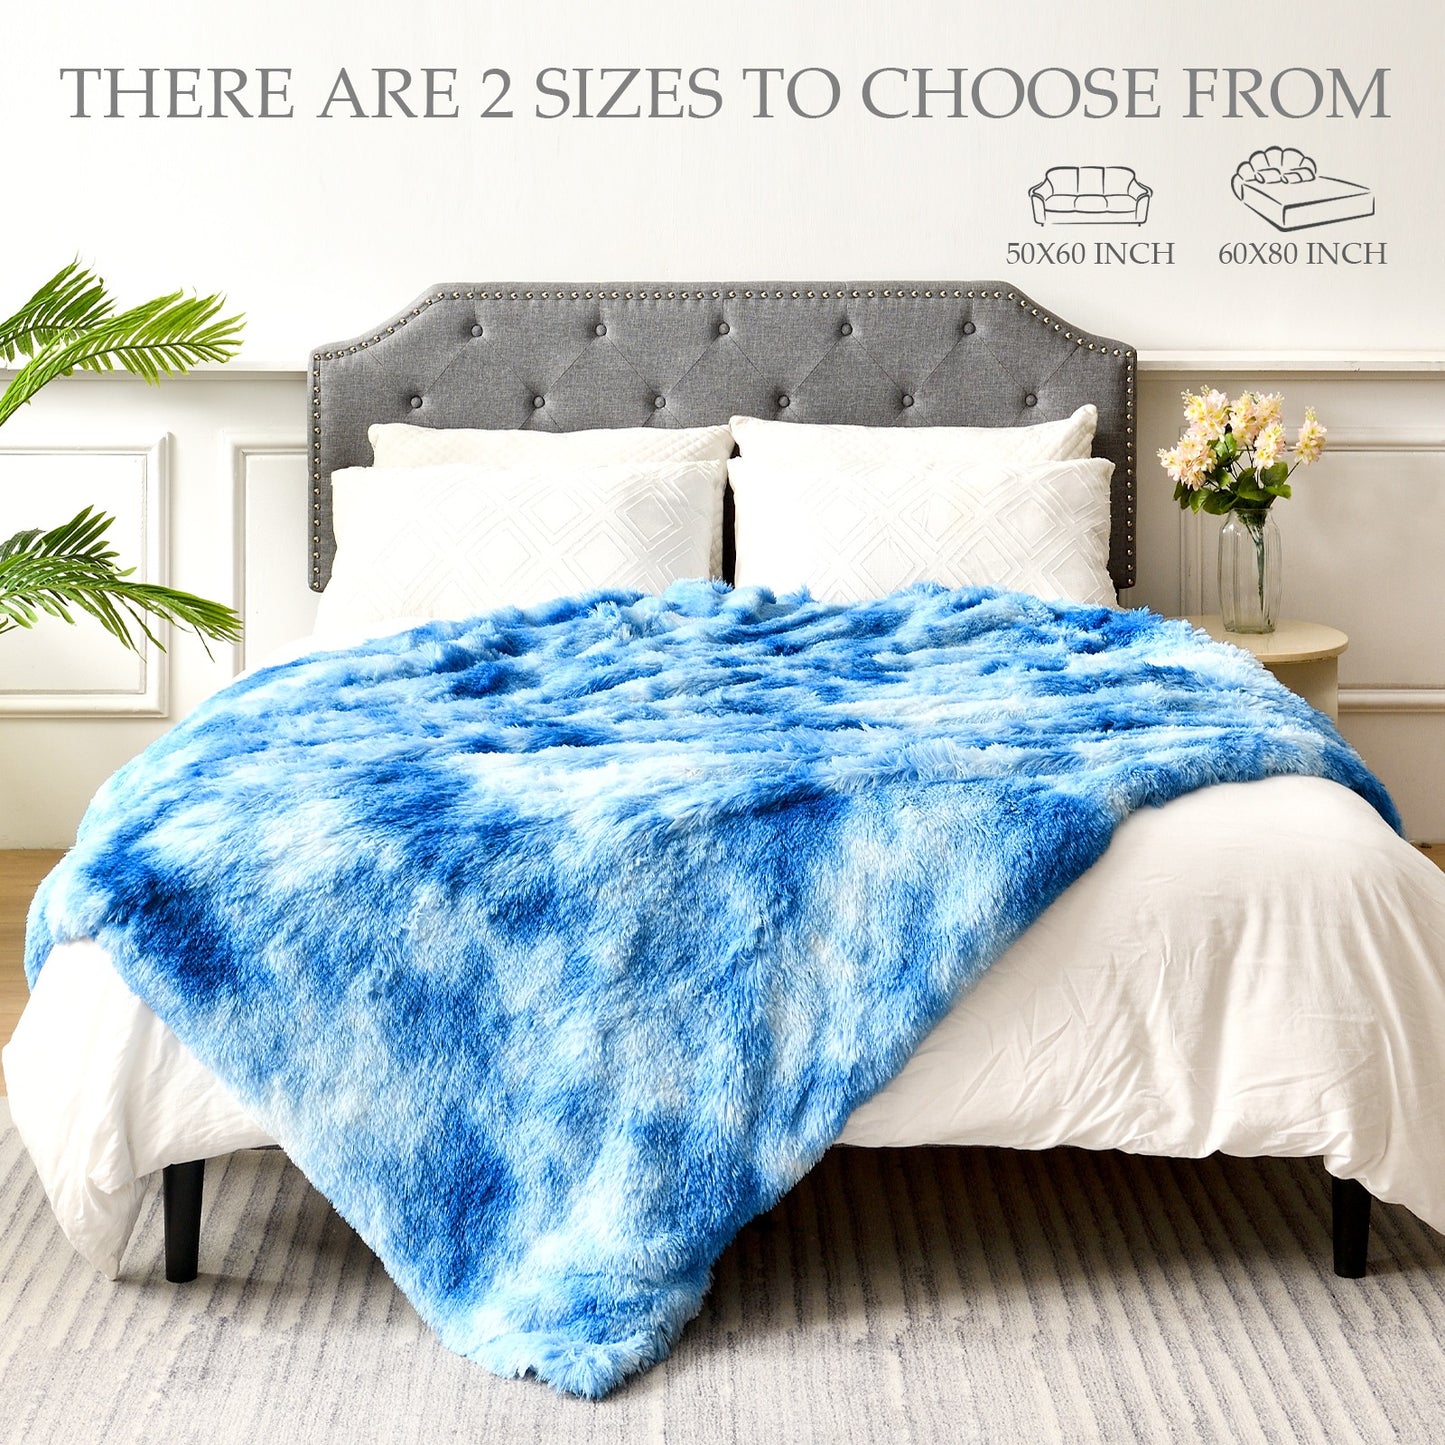 Exclusivo Mezcla Twin Size Faux Fur Bed Blanket, Super Soft Fuzzy and Plush Reversible Sherpa Fleece Blanket and Warm Blankets for Bed, Sofa, Travel, 60X80 inches, Blue